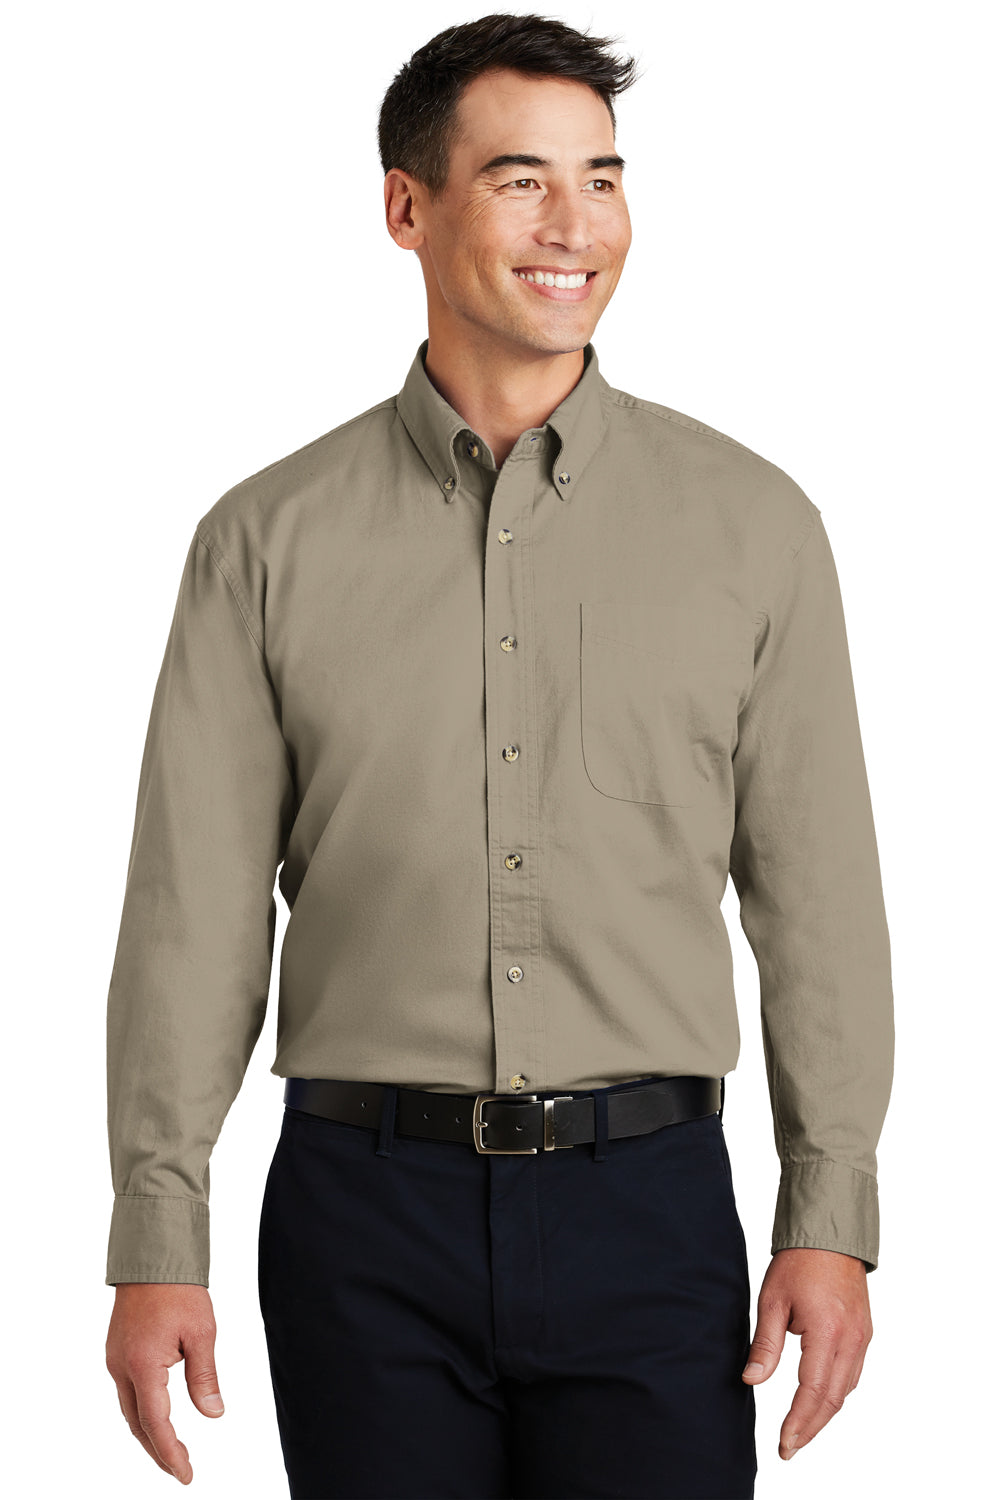 Port Authority S600T Mens Long Sleeve Button Down Shirt w/ Pocket Khaki Brown Front